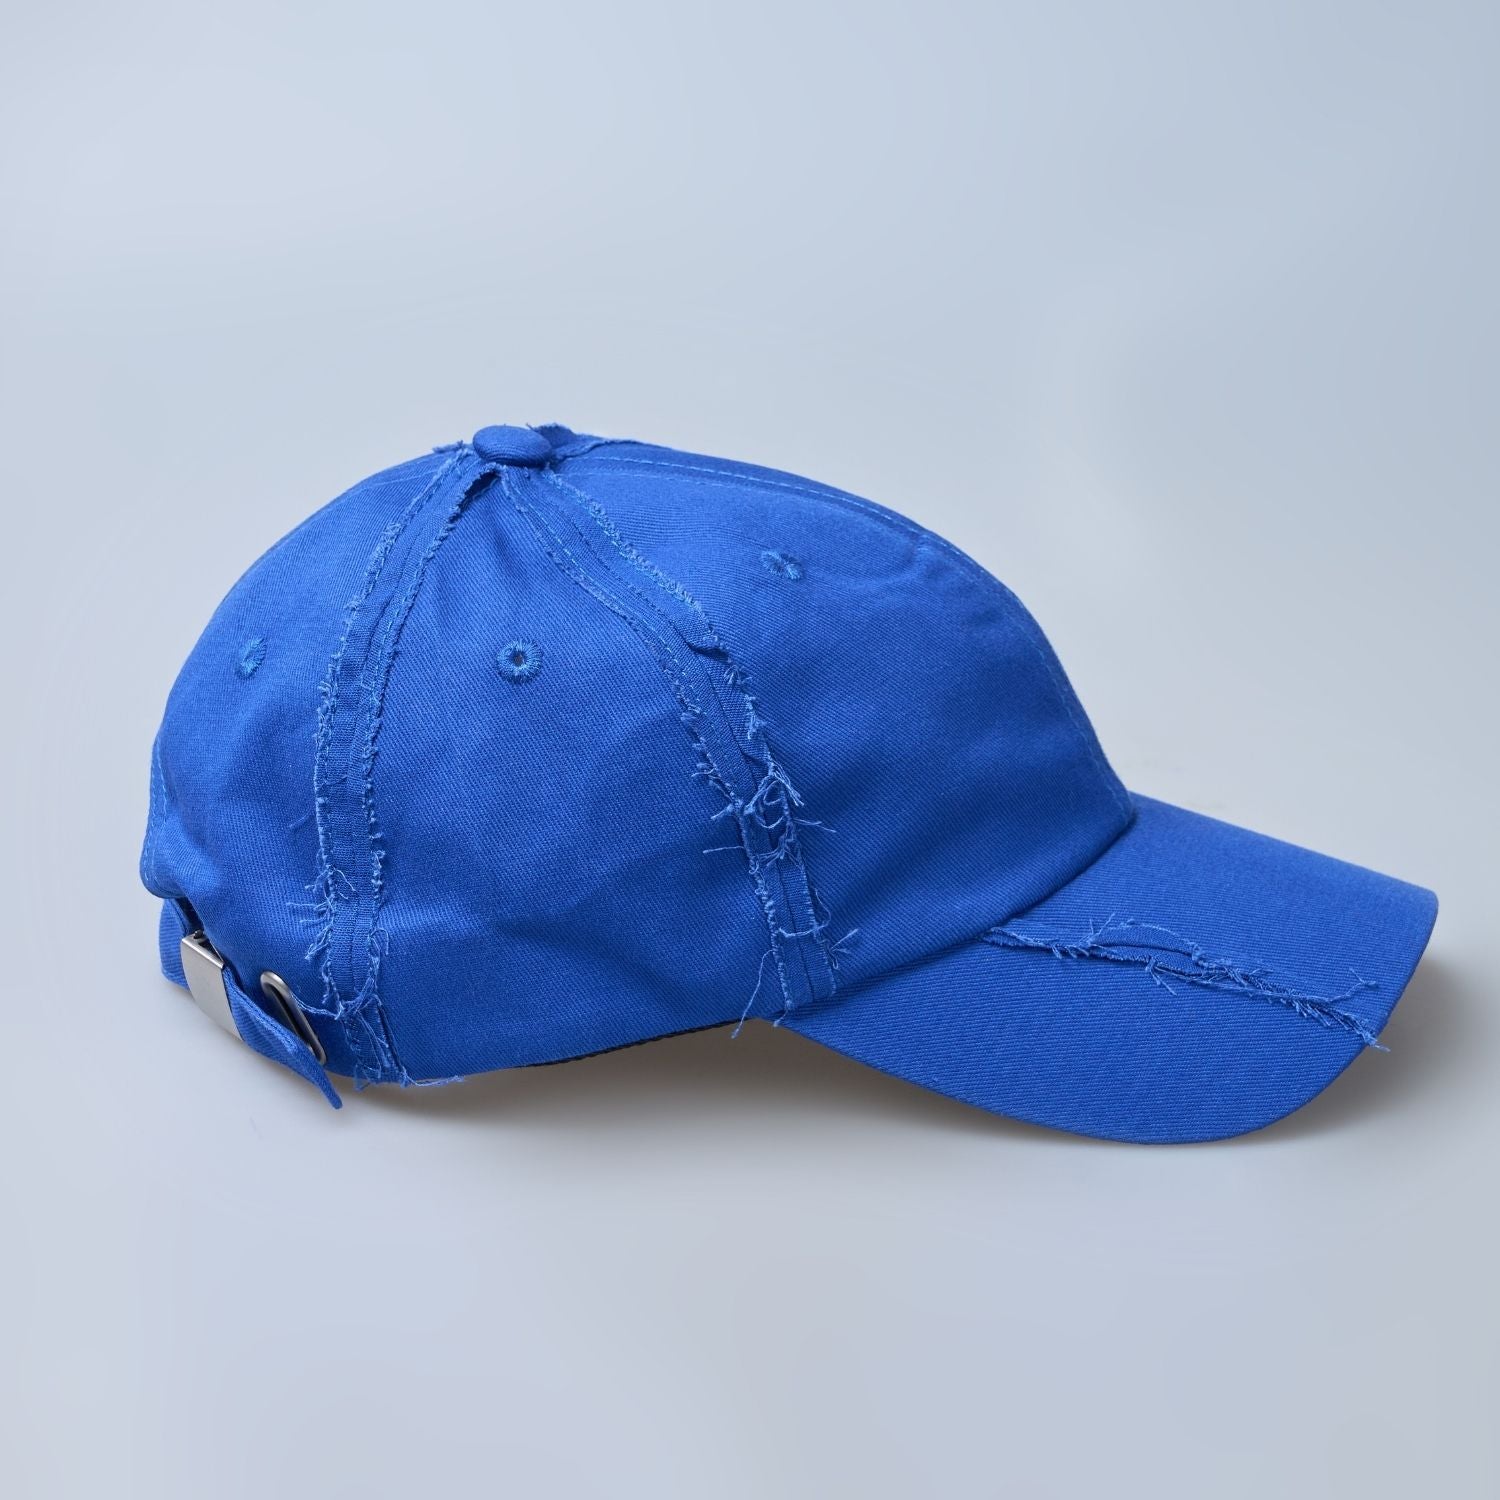 Blue colored, wide brim cap for men with adjustable strap, side view.